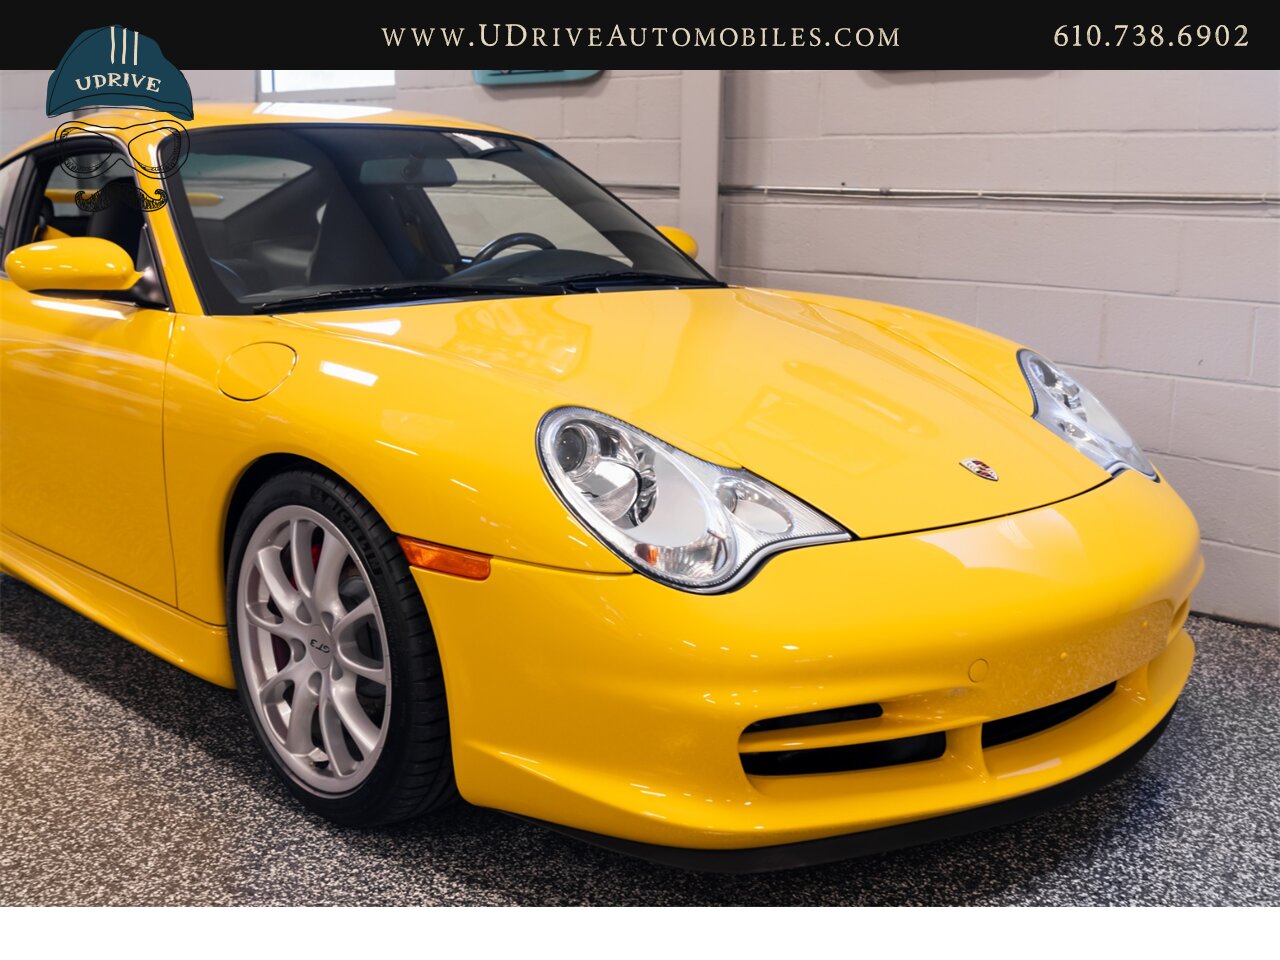 2005 Porsche 911 GT3 996 Speed Yellow Sport Seats Pntd Hardbacks  Pntd Console Deviating Stitch Yellow Accents Throughout - Photo 15 - West Chester, PA 19382